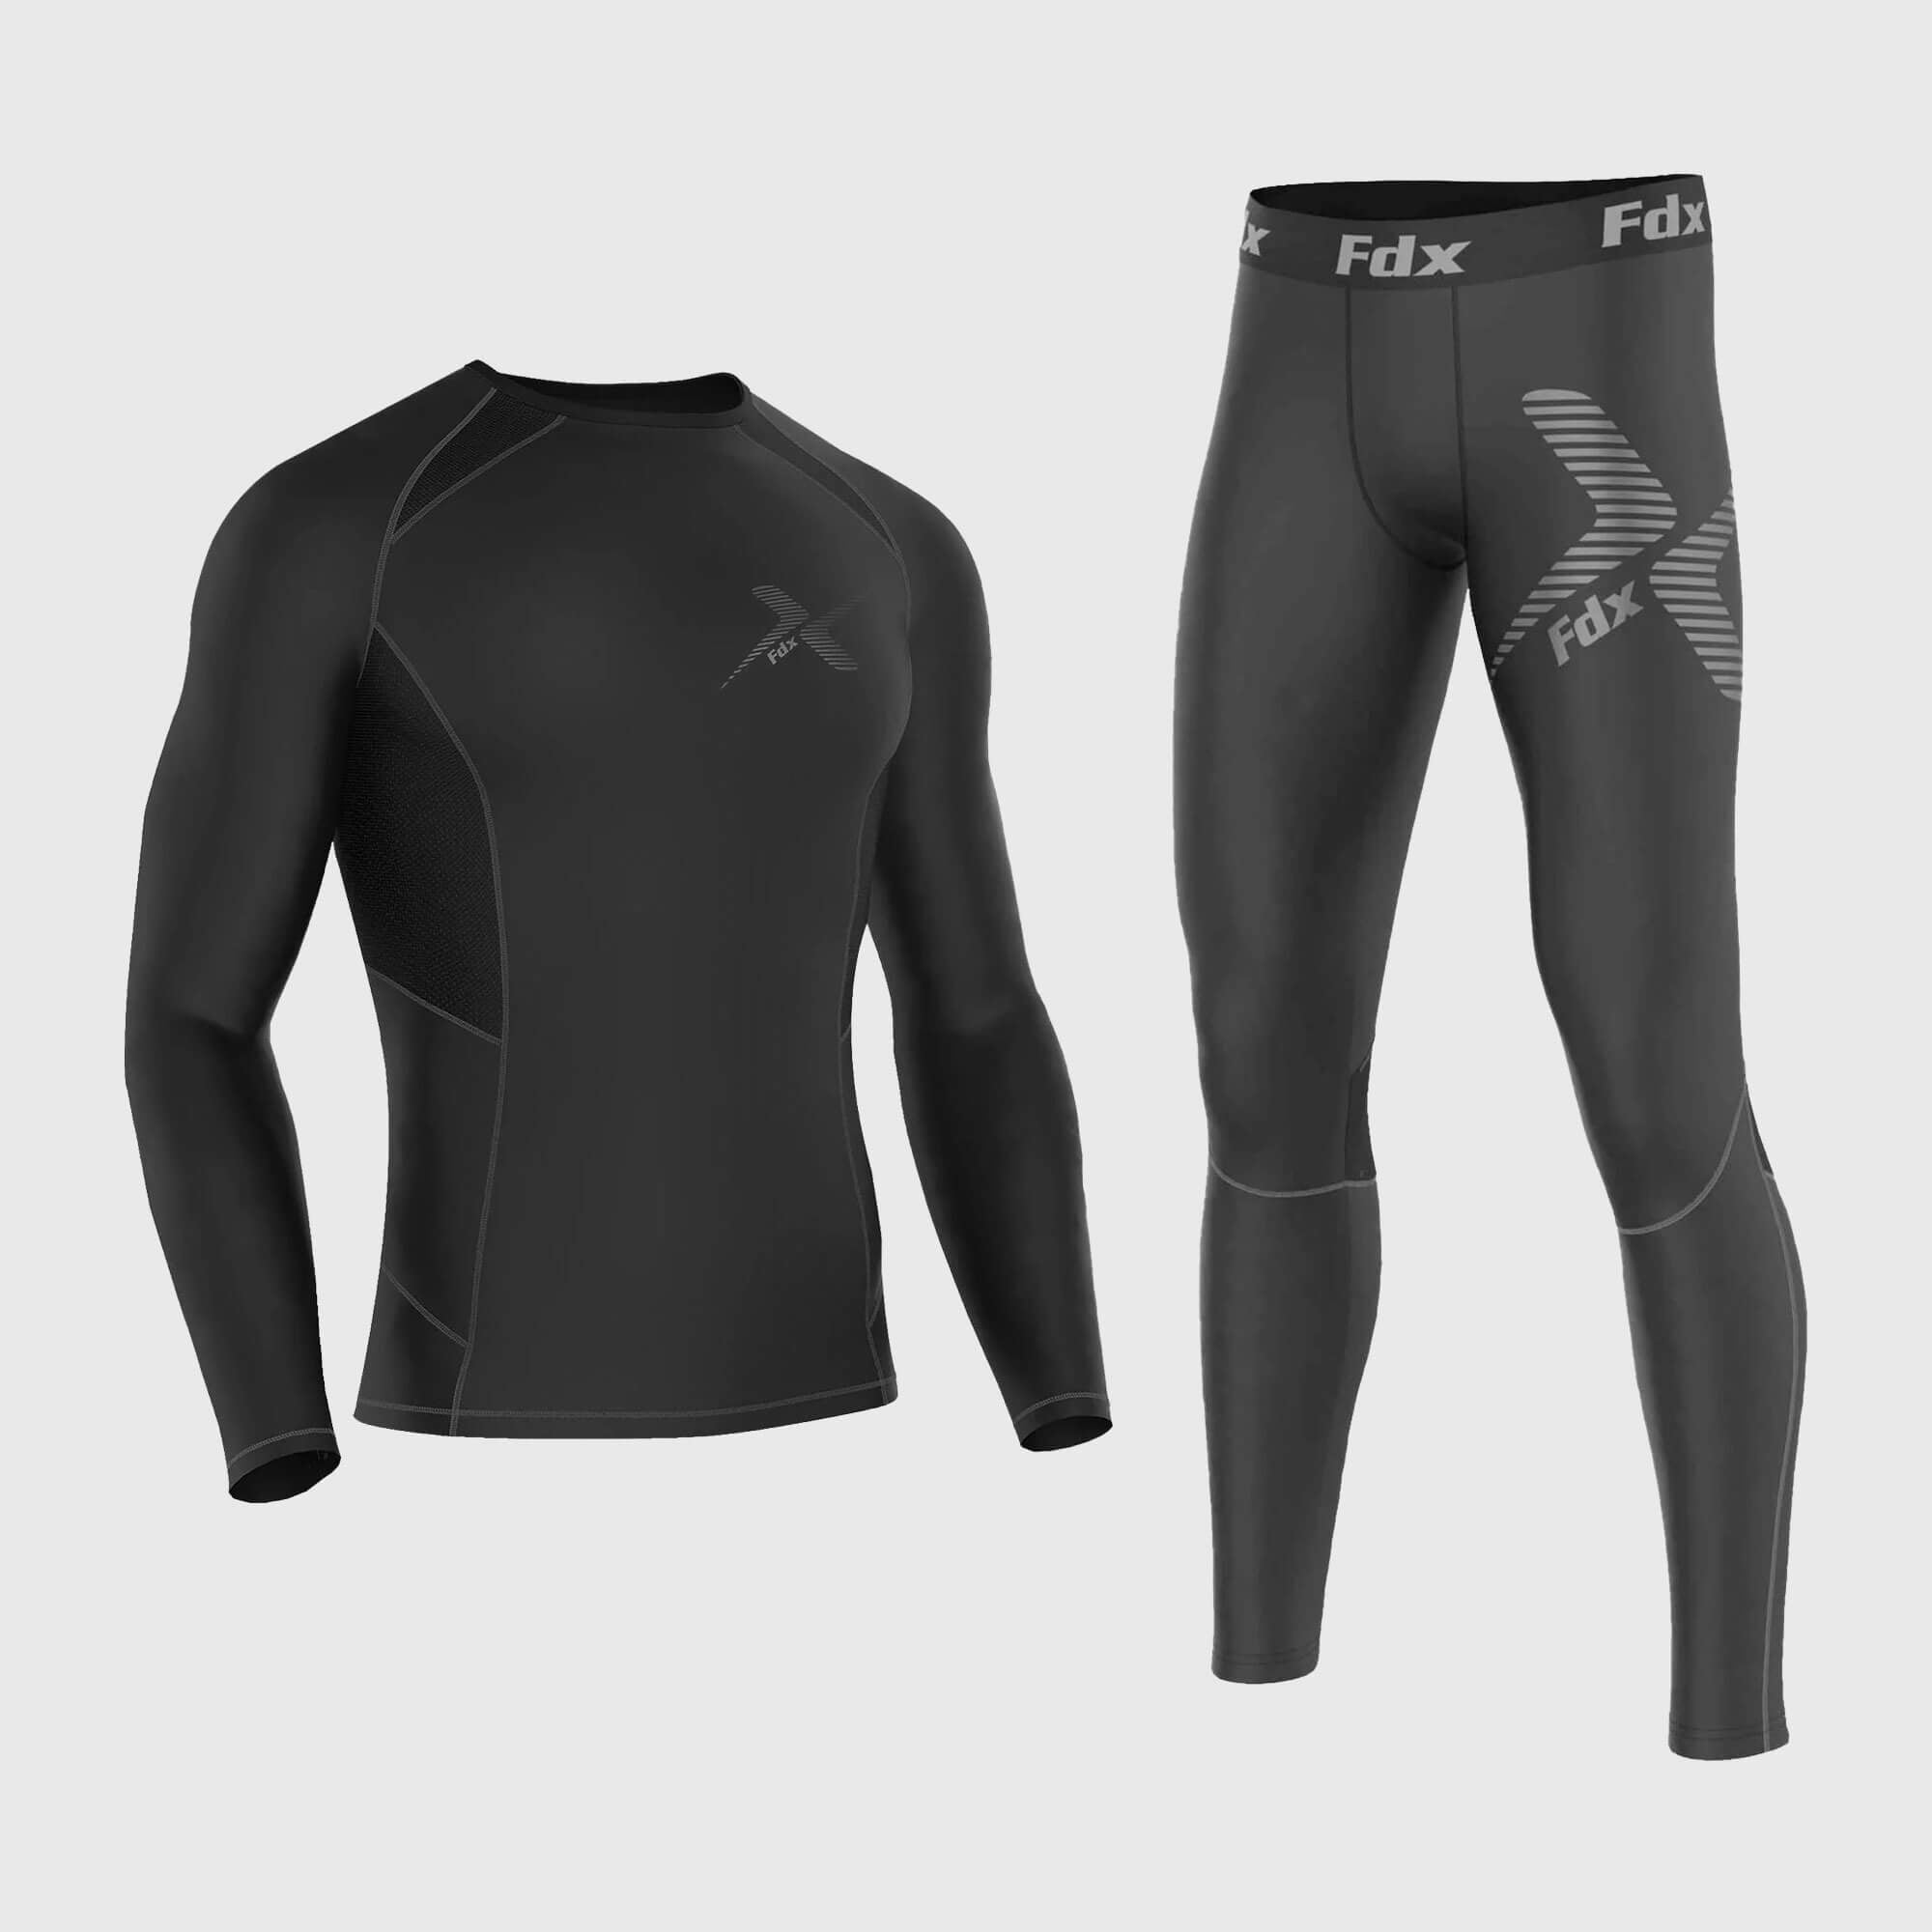 Fdx Mens Grey Long Sleeve Compression Top & Compression Tights Base Layer Gym Training Jogging Yoga Fitness Body Wear - Recoil